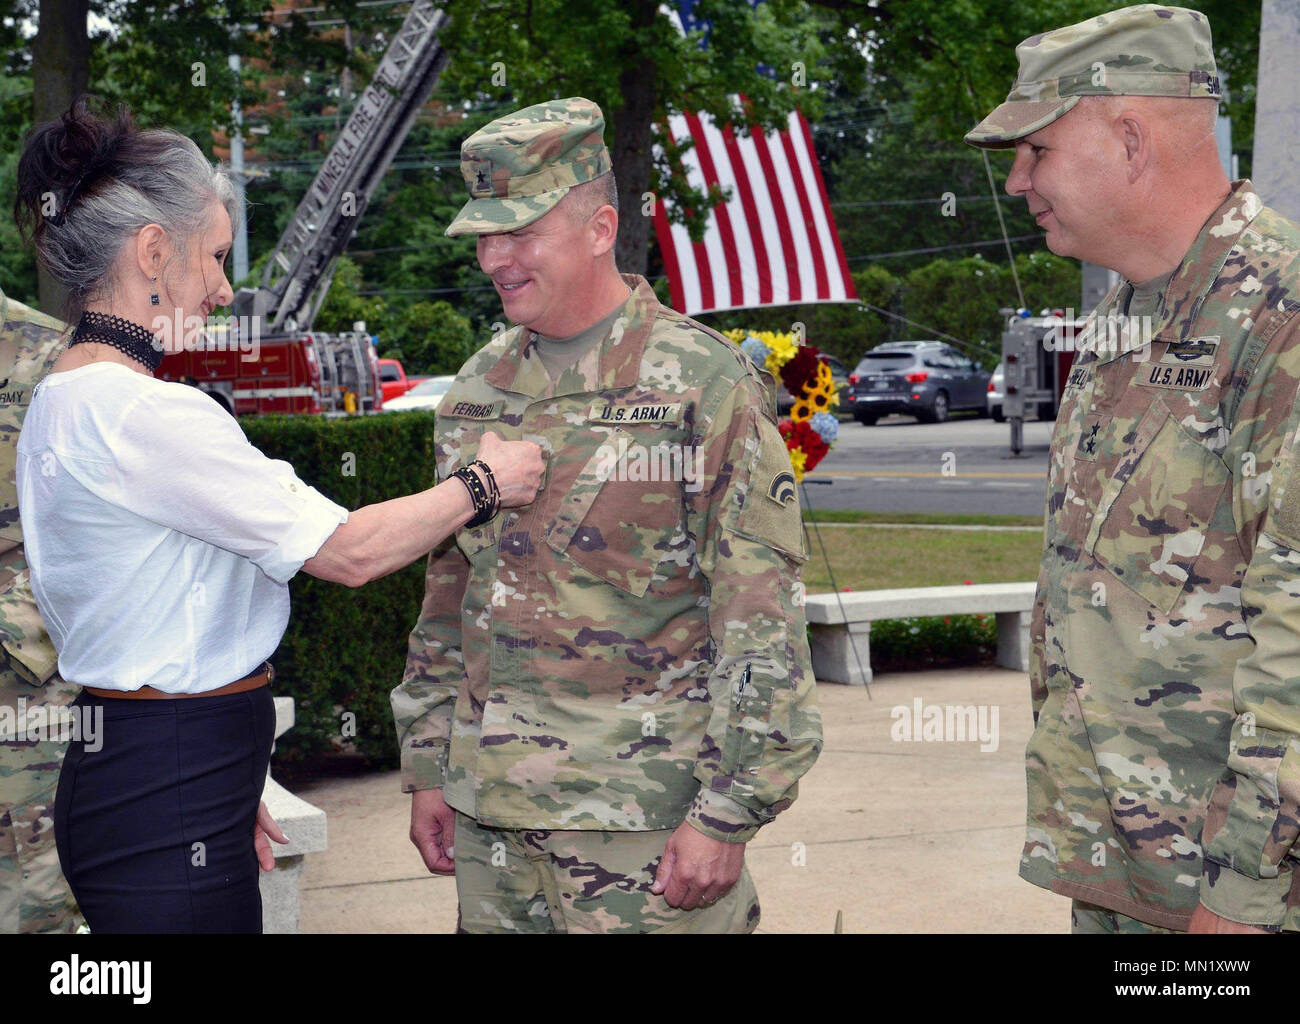 New York Army National Guard Major General Steven Ferrari receives his two-star rank from his wife Tracy as Major General Raymond Shields, commander of the New York Army National Guard looks on during ceremonies on Saturday, August 12, 2017 at the Rainbow Division Memorial in Garden City, N.Y. Ferrari's promotion took place during a ceremony marking the division's 100th anniversary. Garden City was the site of Camp Mills in 1917, where the division formed. Nwe York State Division of Military and Naval Affairs photo by Capt. Mark Getman. Stock Photo